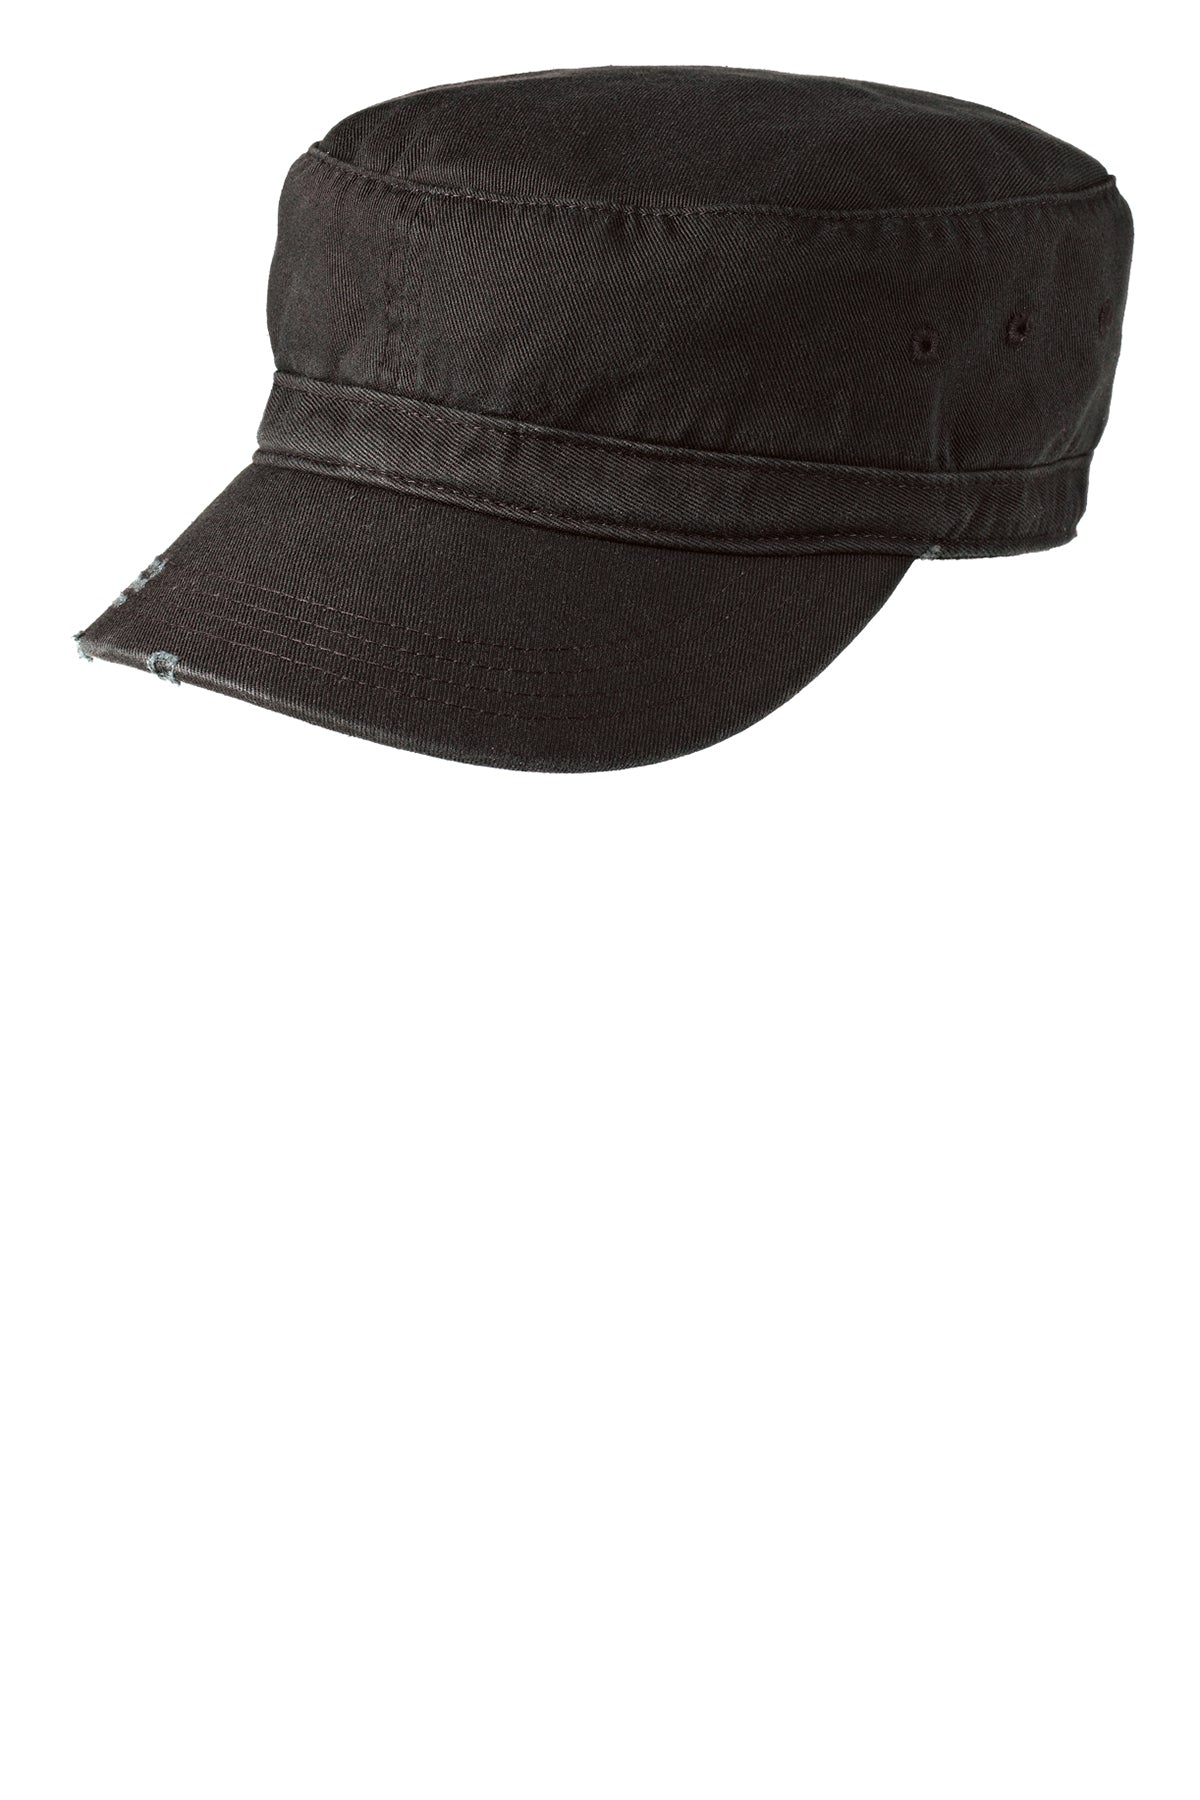 District Distressed Military Hats, Black